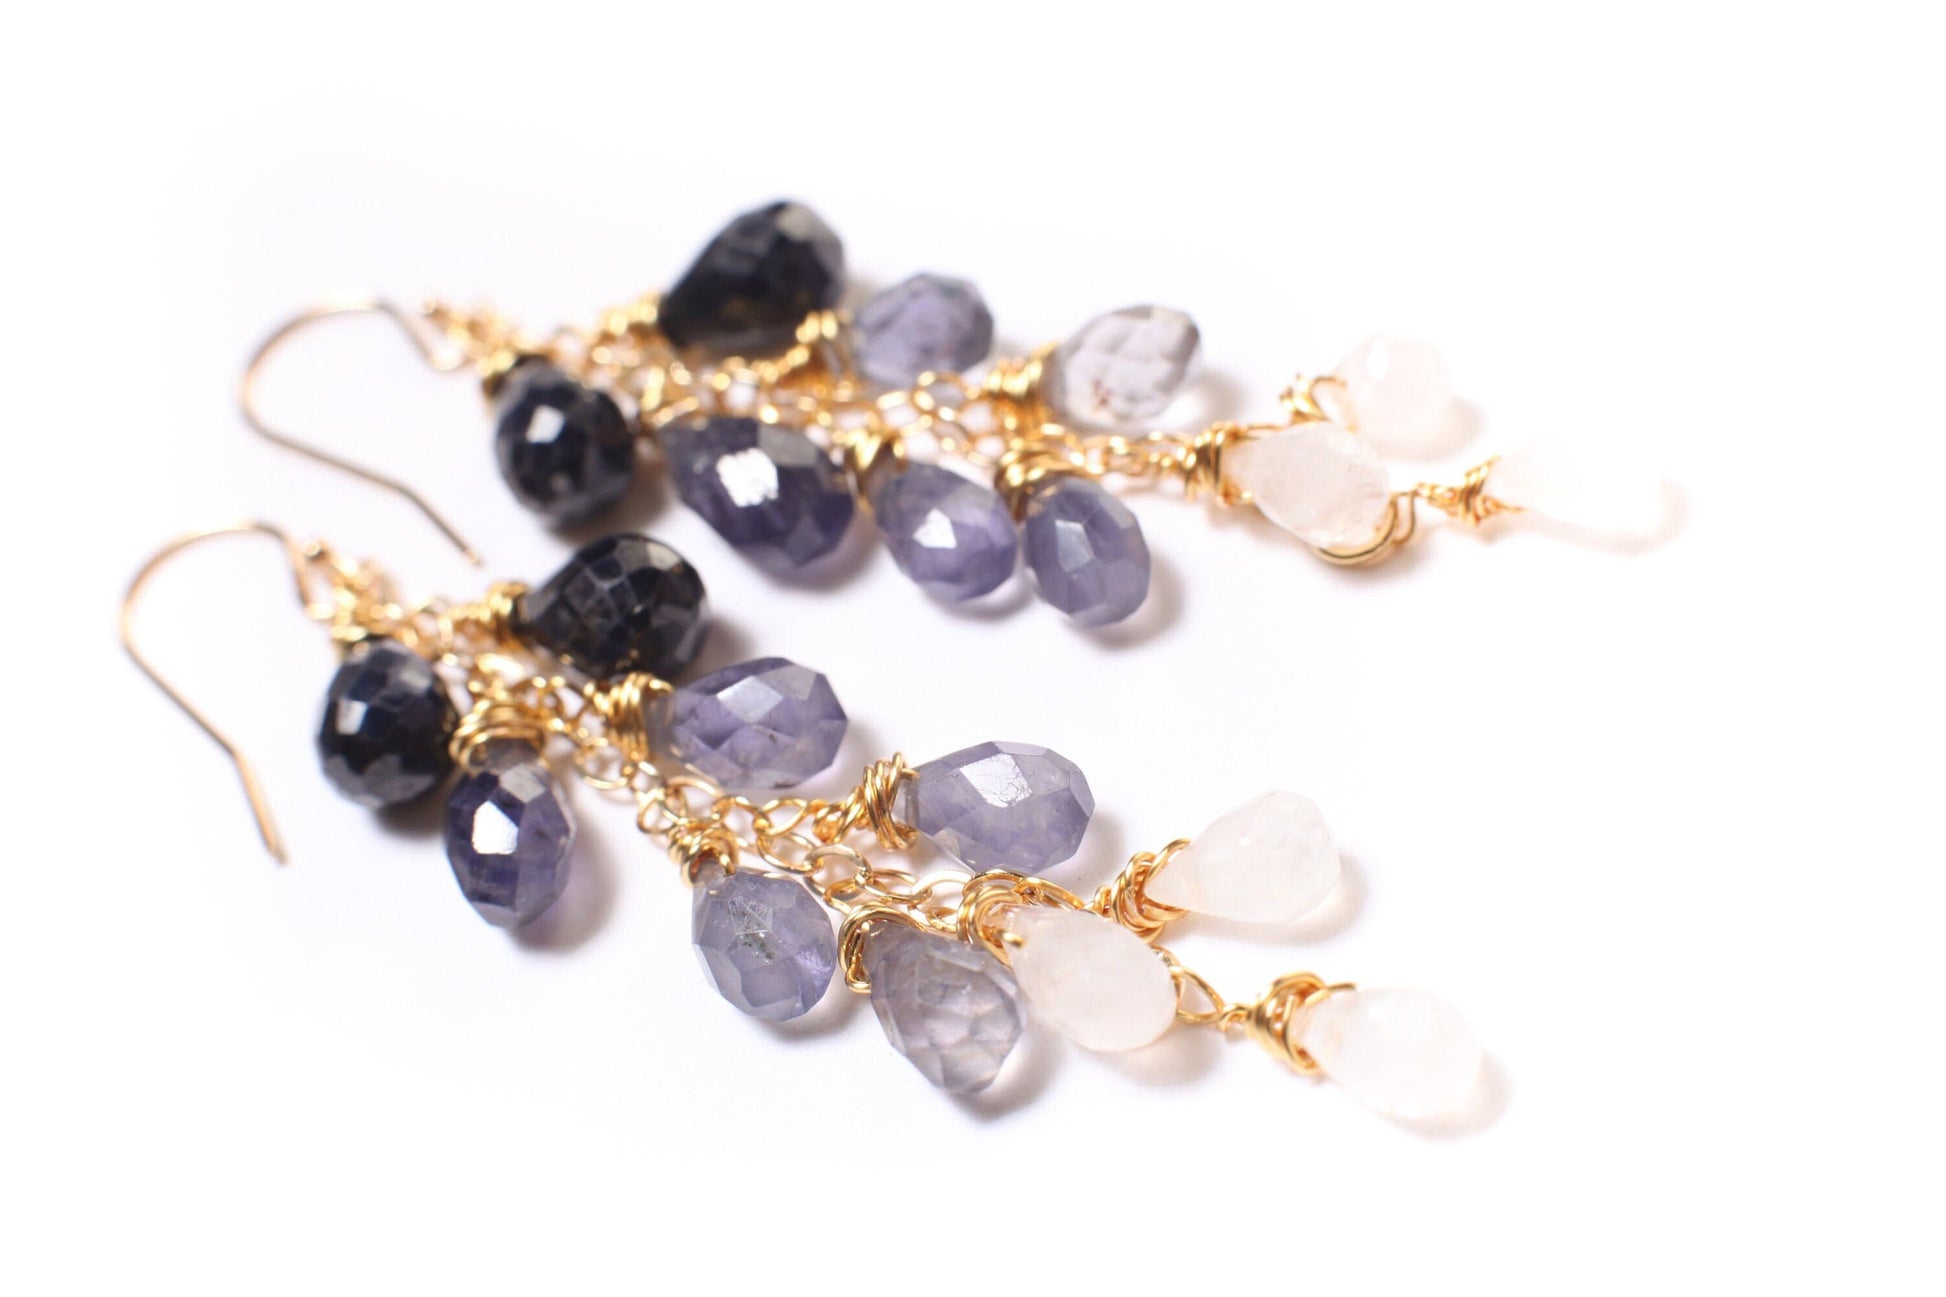 Ombre Blue Sapphire, Iolite, Moonstone Wire Wrapped Dangling Faceted Briolette Drop 5x7-6x9mm Cascade Earrings in 14K Gold Filled Earring